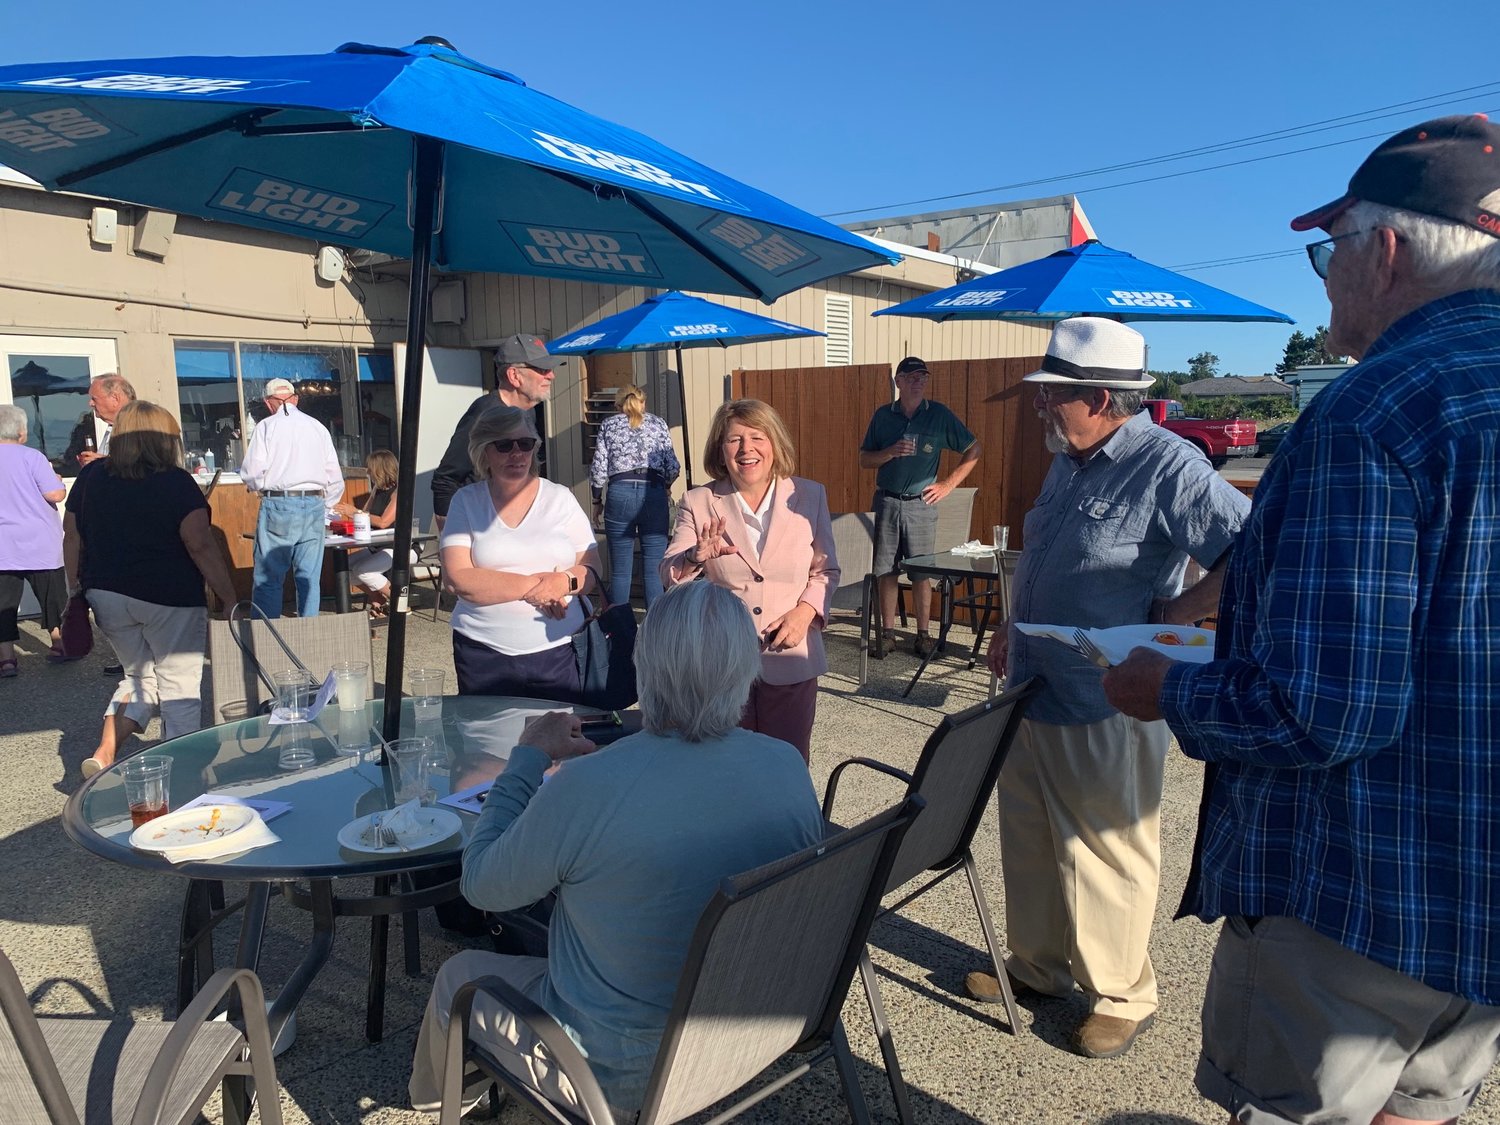 Lisa Brown, director of Washington state department of commerce, was the featured speaker at the Point Roberts Taxpayers Association’s annual general meeting on July 21. Among other issues, Brown discussed how communities such as Point Roberts could successfully emerge from the pandemic.